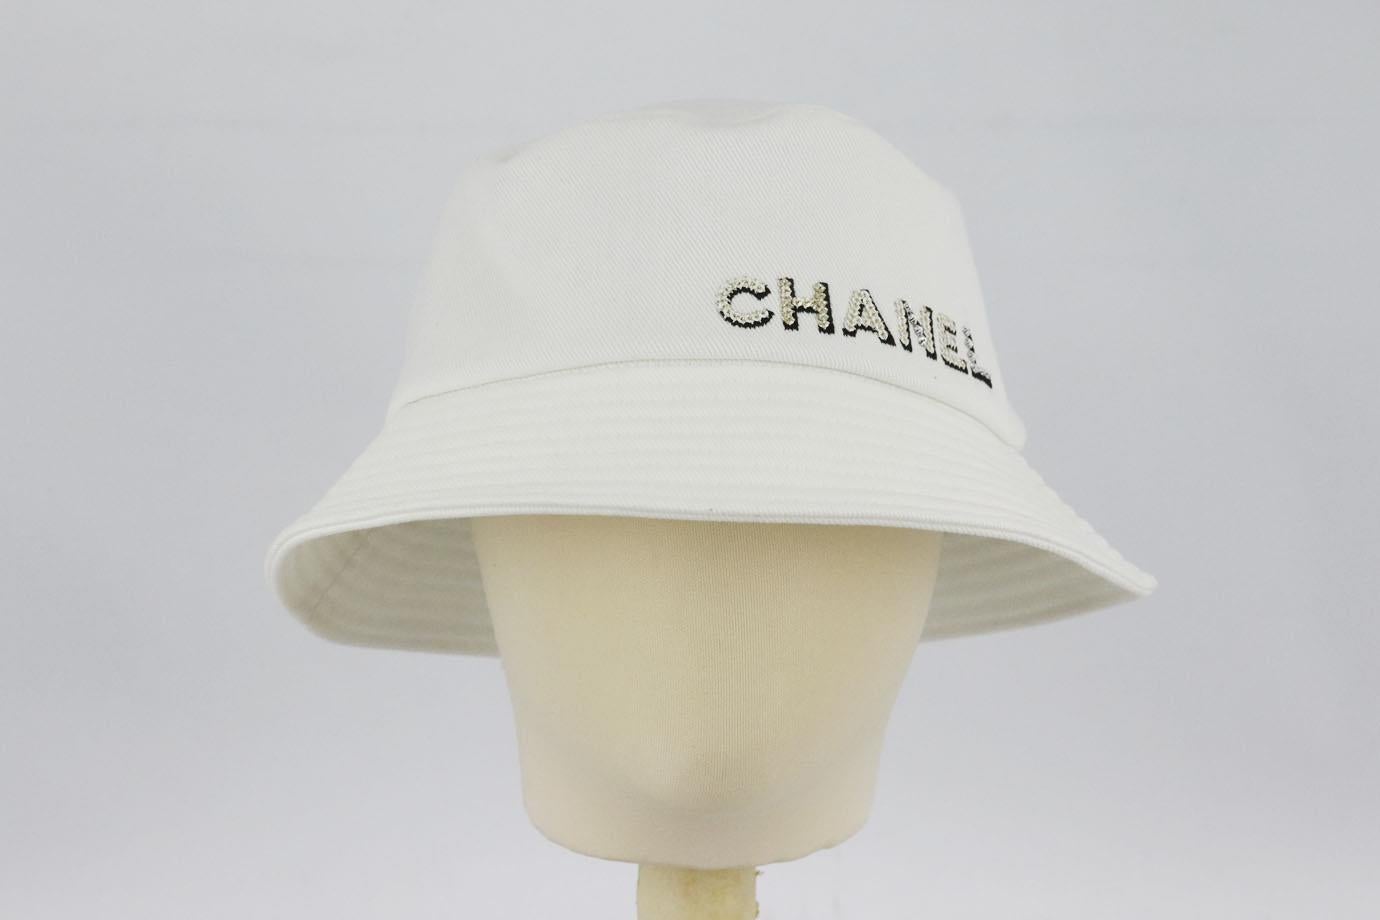 Chanel 2022 logo embellished cotton twill bucket hat. White. Slips on. 100% Cotton; lining: 100% cotton. Does not come with dustbag or box. Size: Medium (57 cm). Brim Width: 2.2 in New with tags
